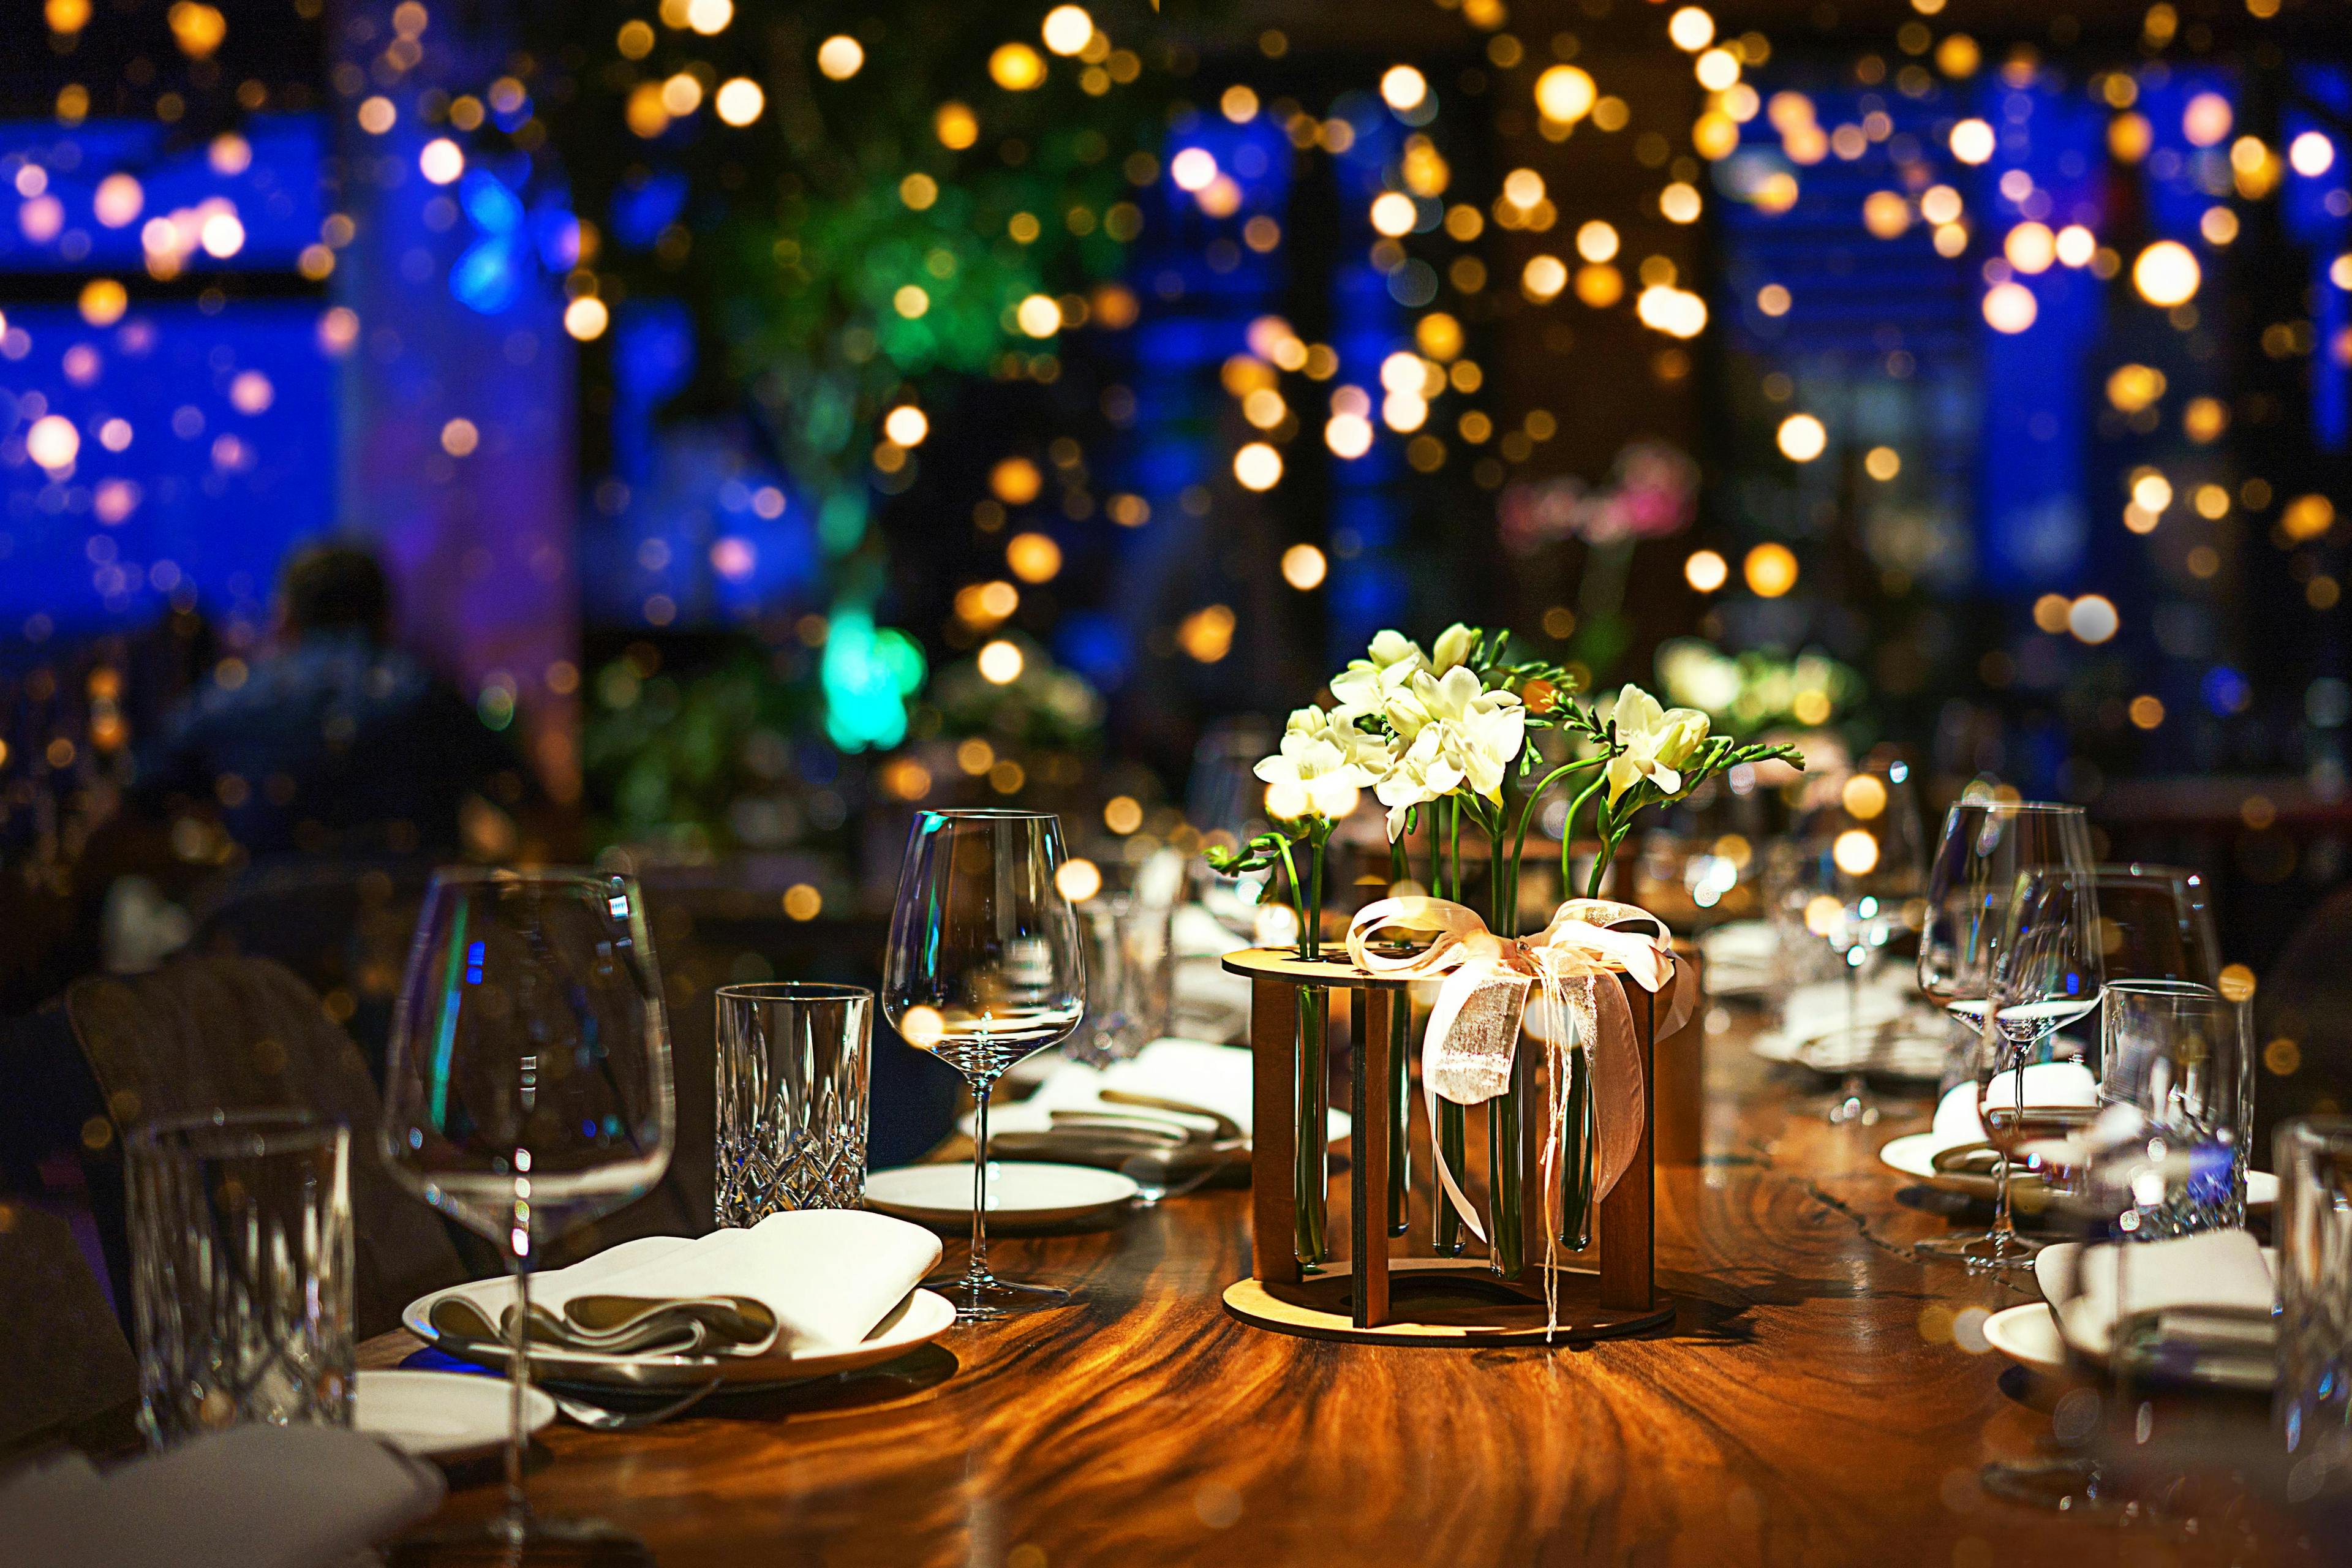 Festive dinner table with lights in background for New Year's Eve celebration.